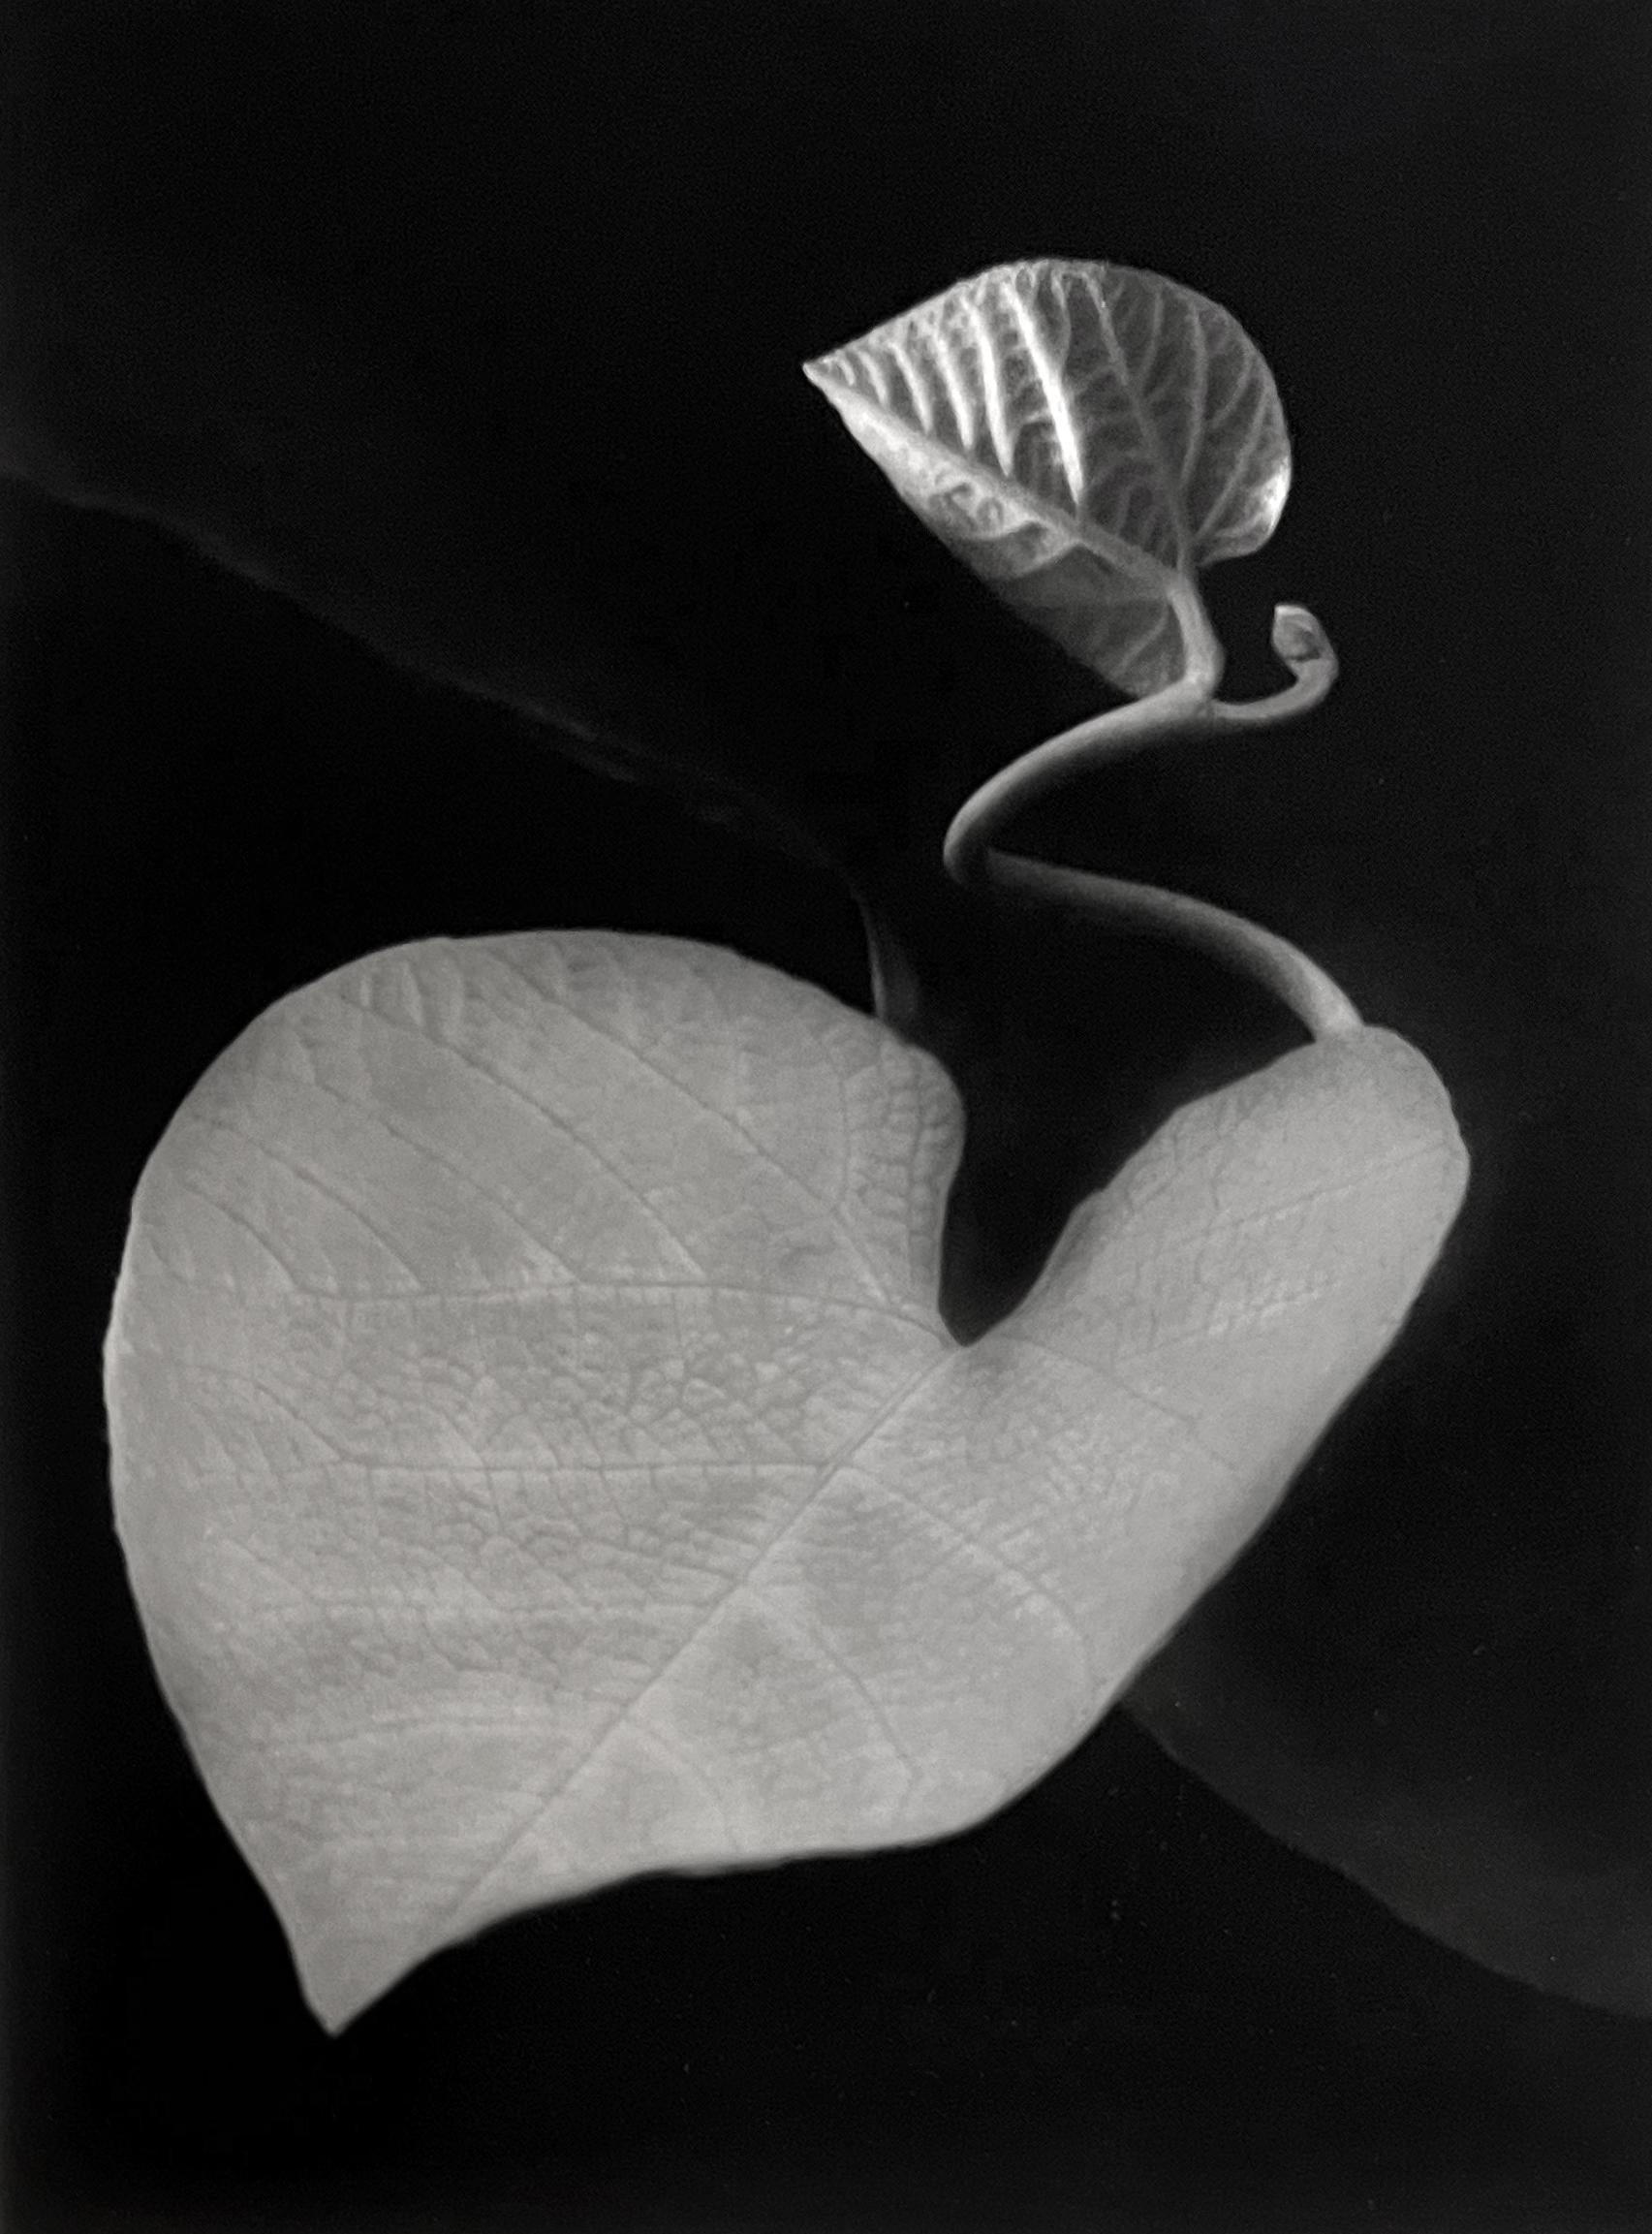 Black and White Photograph Paul Caponigro - Deux feuilles, Rochester, NY, 1963